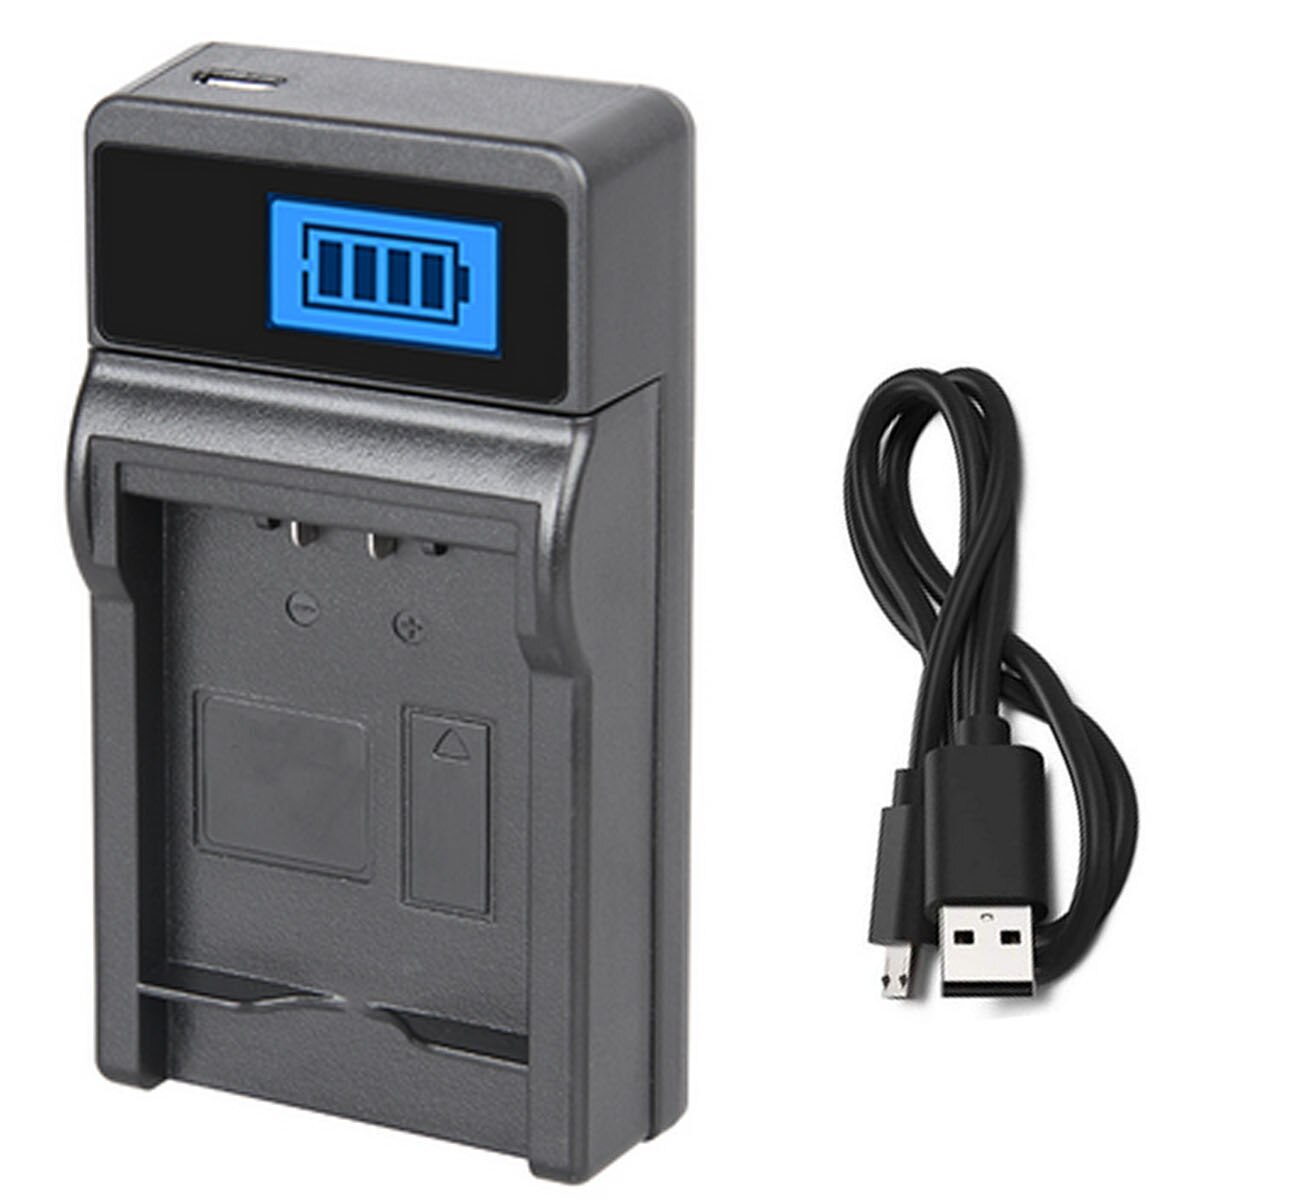 Batterij Lader Voor Nikon Coolpix AW110s, AW120s, AW130s, W300, B600, A900, A1000 Digitale Camera: 1x LCD USB Charger